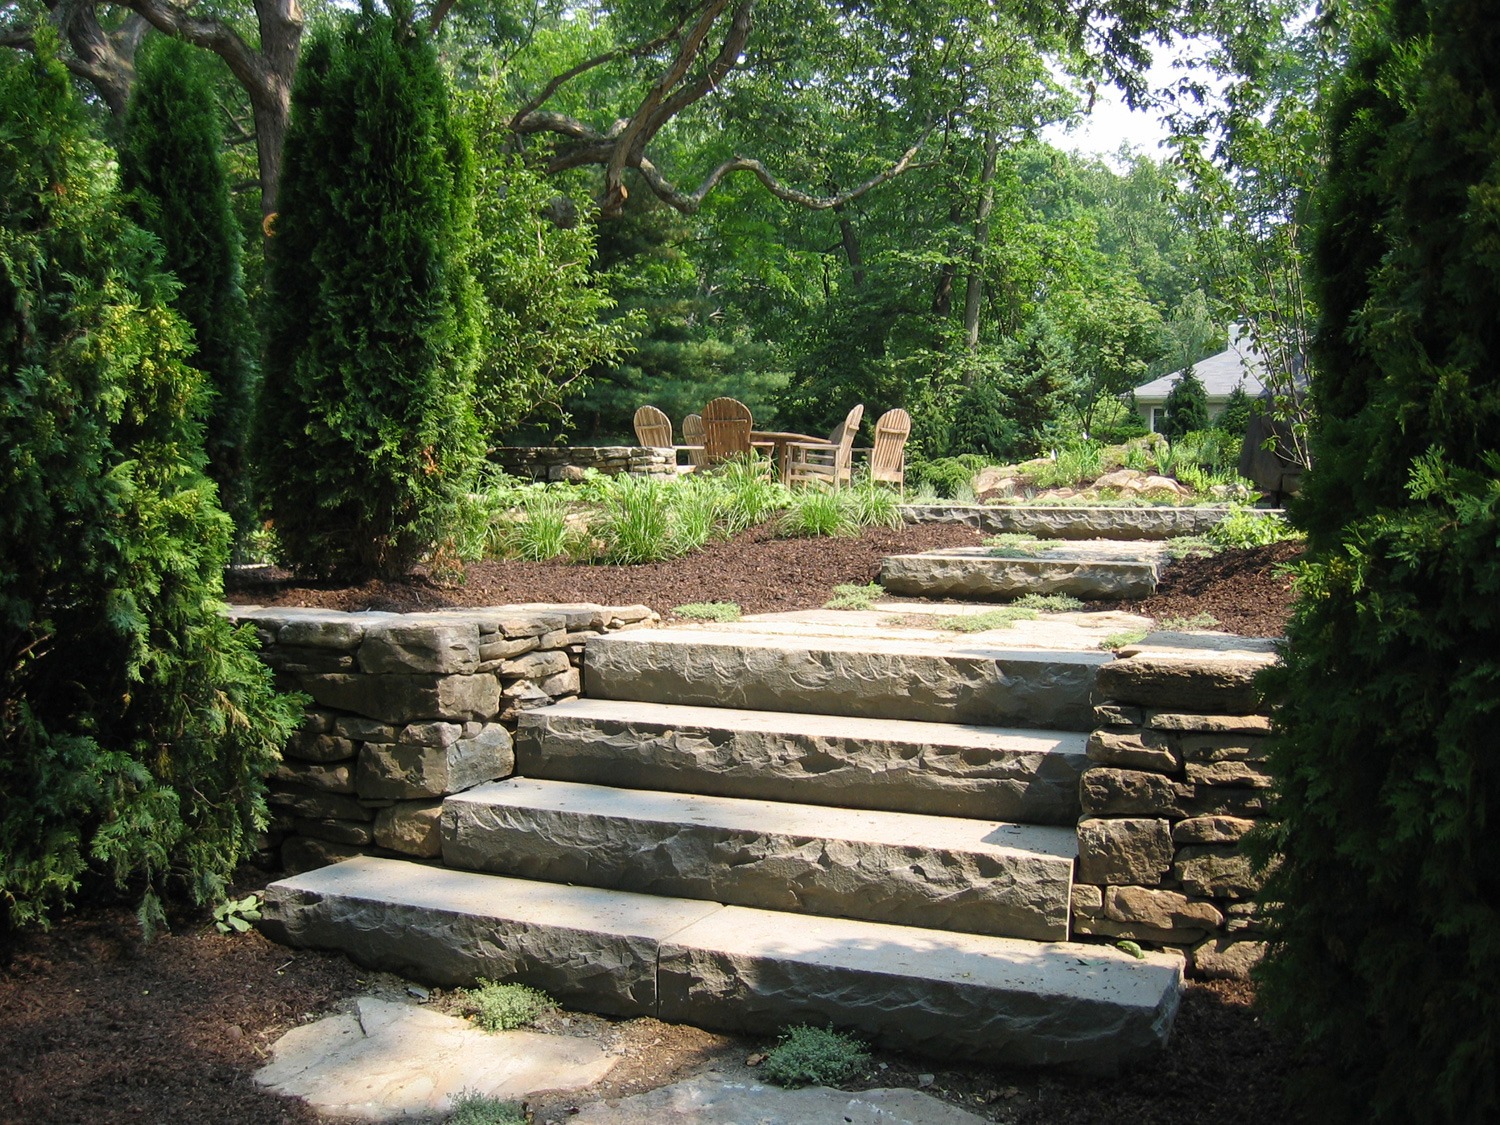 A landscaped garden with stone steps flanked by green shrubs. Wooden Adirondack chairs visible in the background under a tree canopy.